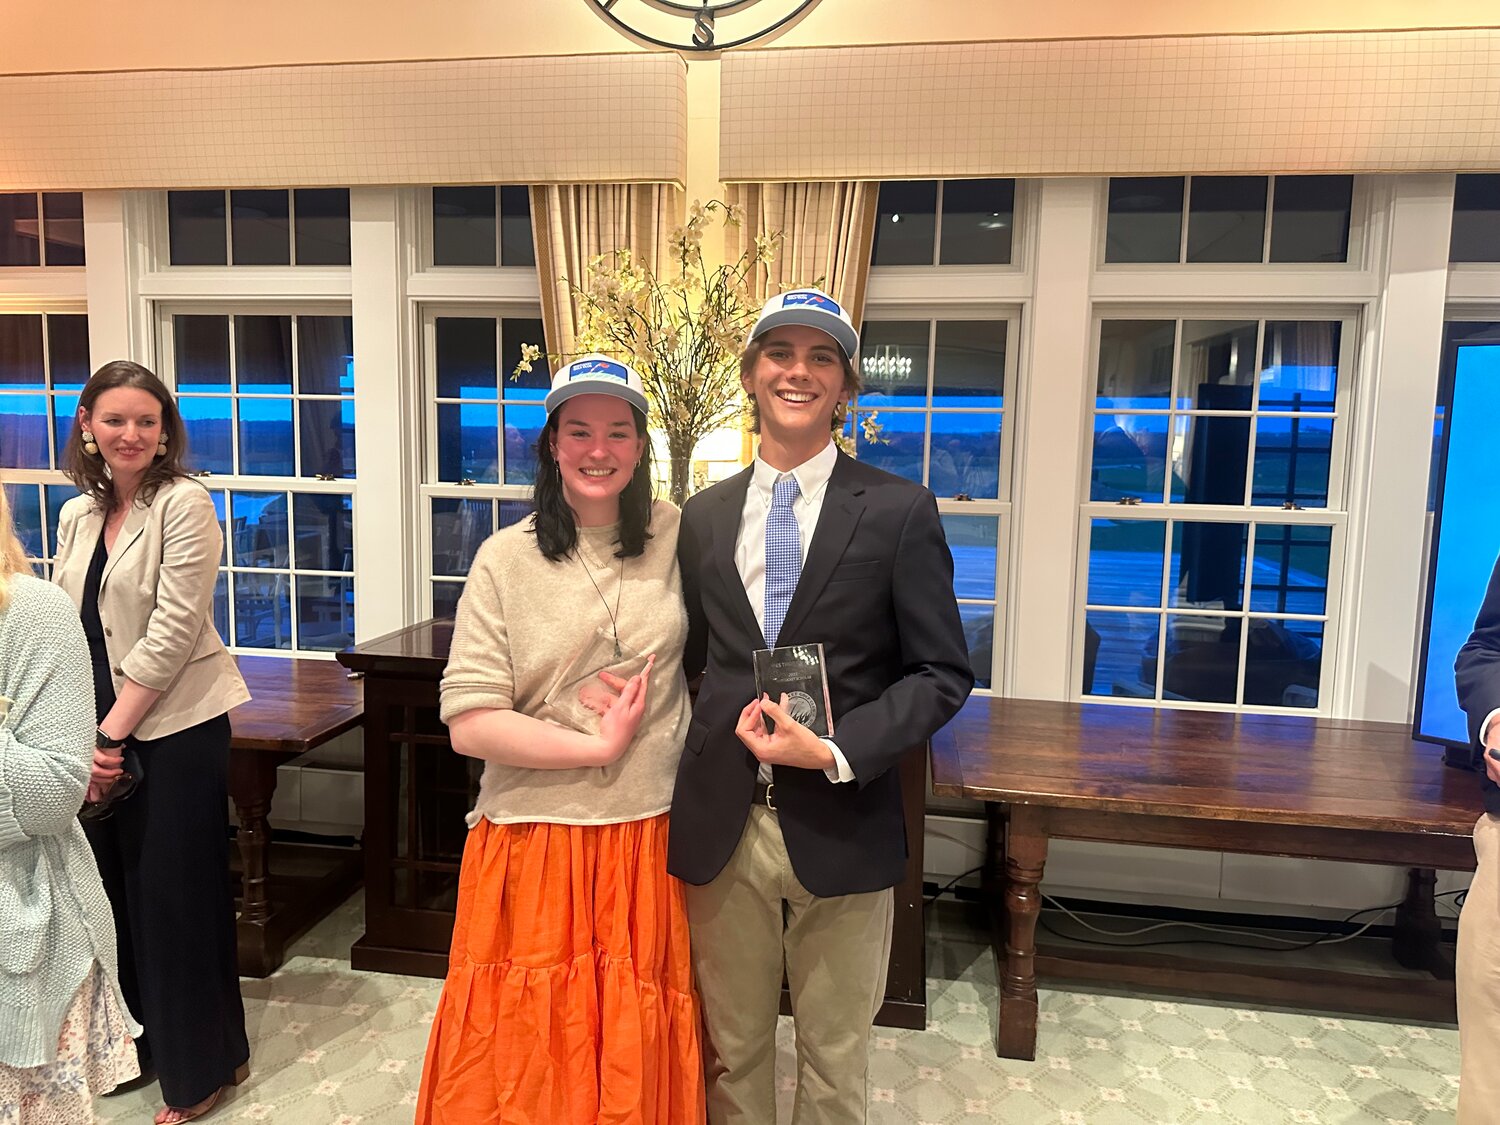 Ellie Kinsella and Wes Thornewill were named the 2023 Nantucket Scholars Wednesday at the Nantucket Golf Club.